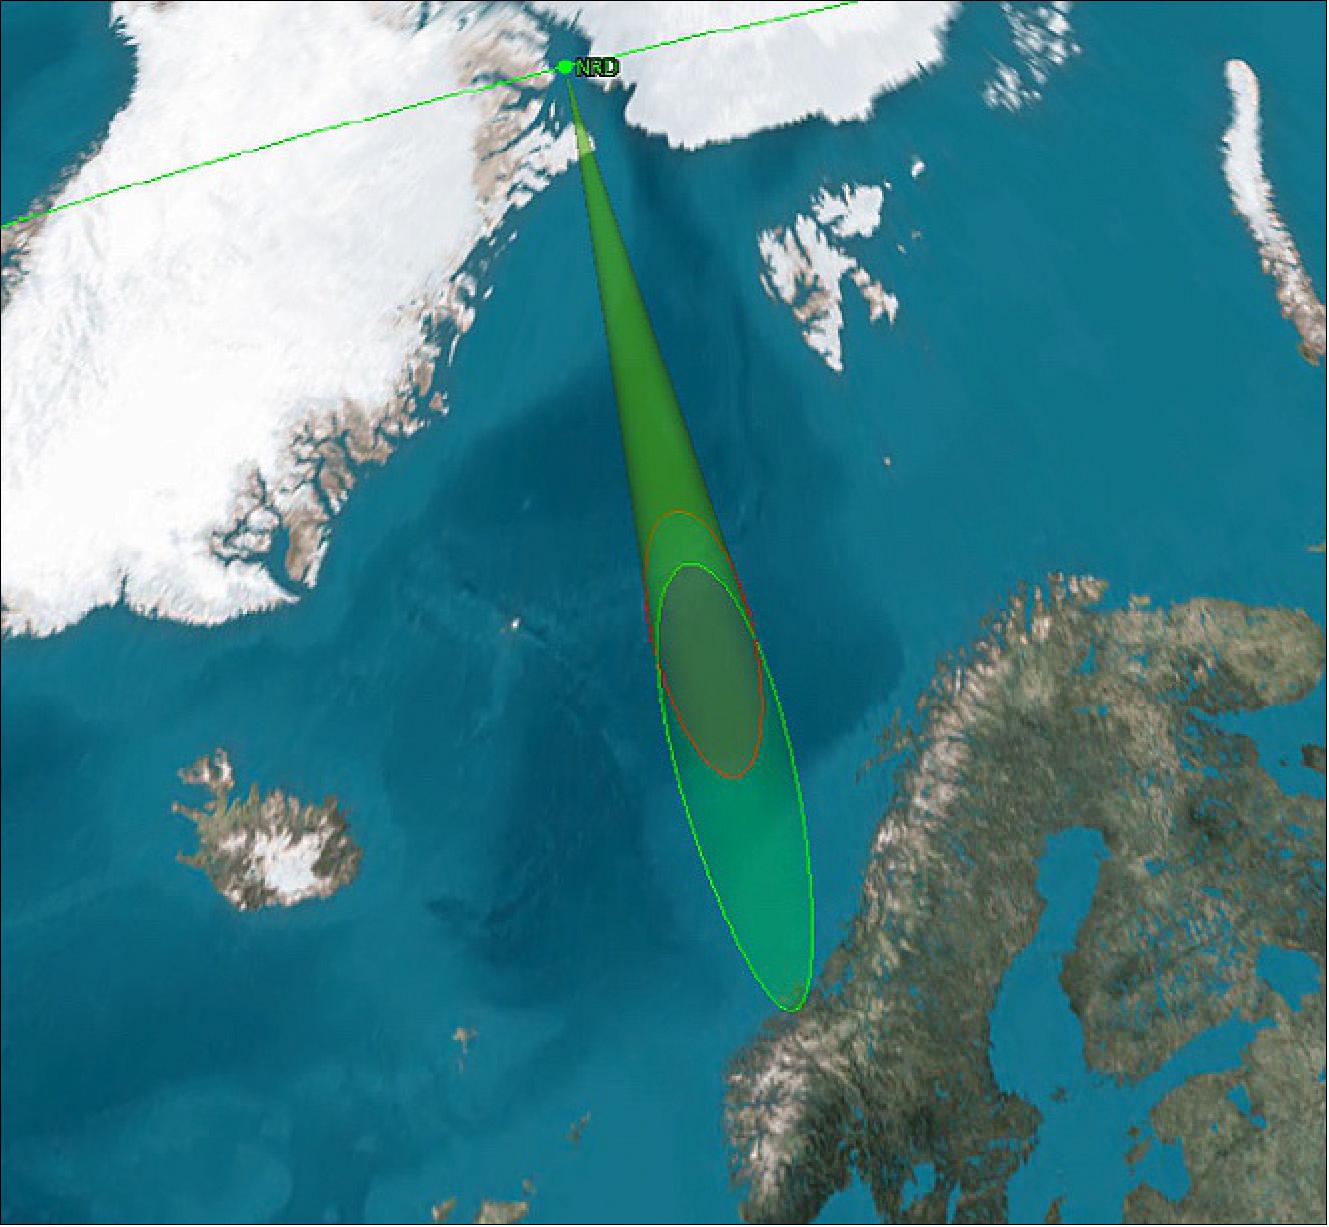 Figure 3: Alternate example of NRD payload coverage (in red and green) during a typical pass over Greenland from an orbit of 600 km (image credit: FFI, Ref. 1) 3)